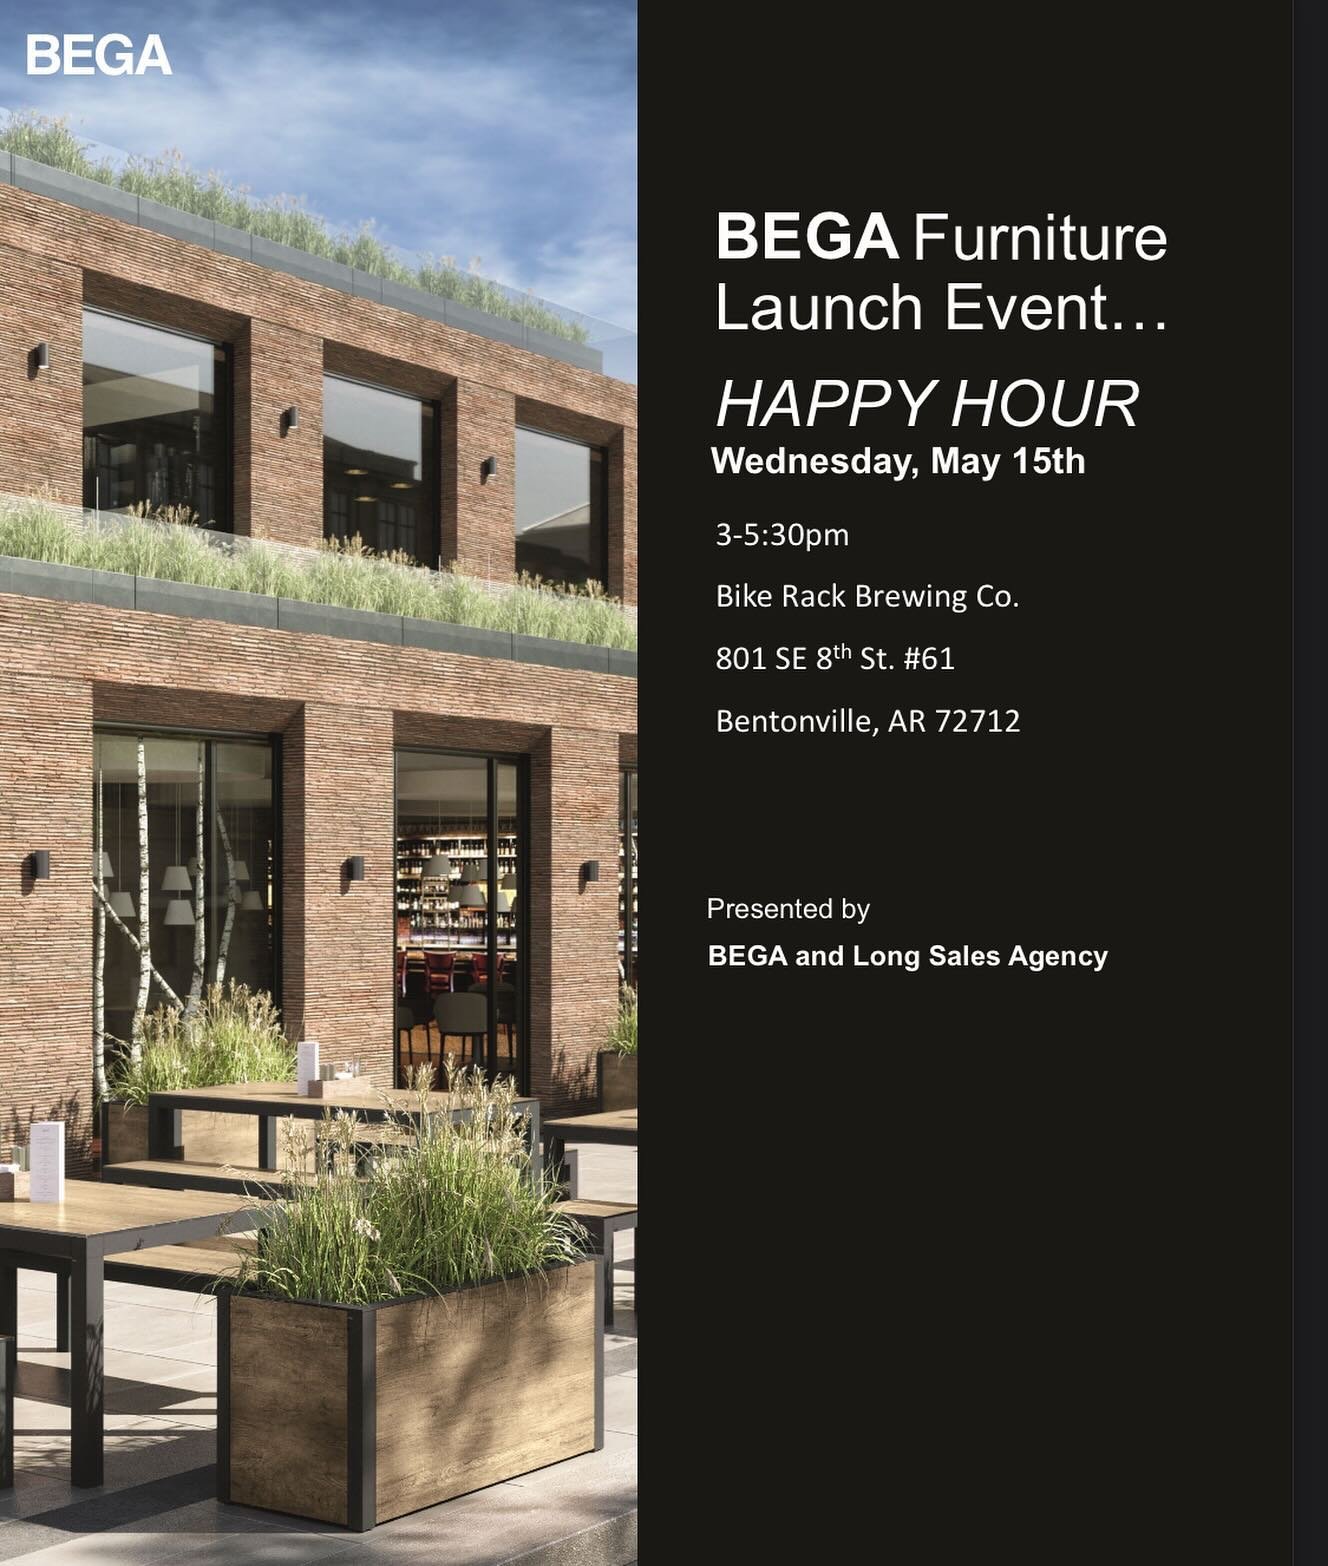 Please join @beganorthamerica for a happy hour at Bike Rack Brewing Co. next Wednesday! All are welcome to come check out their new furniture launch.